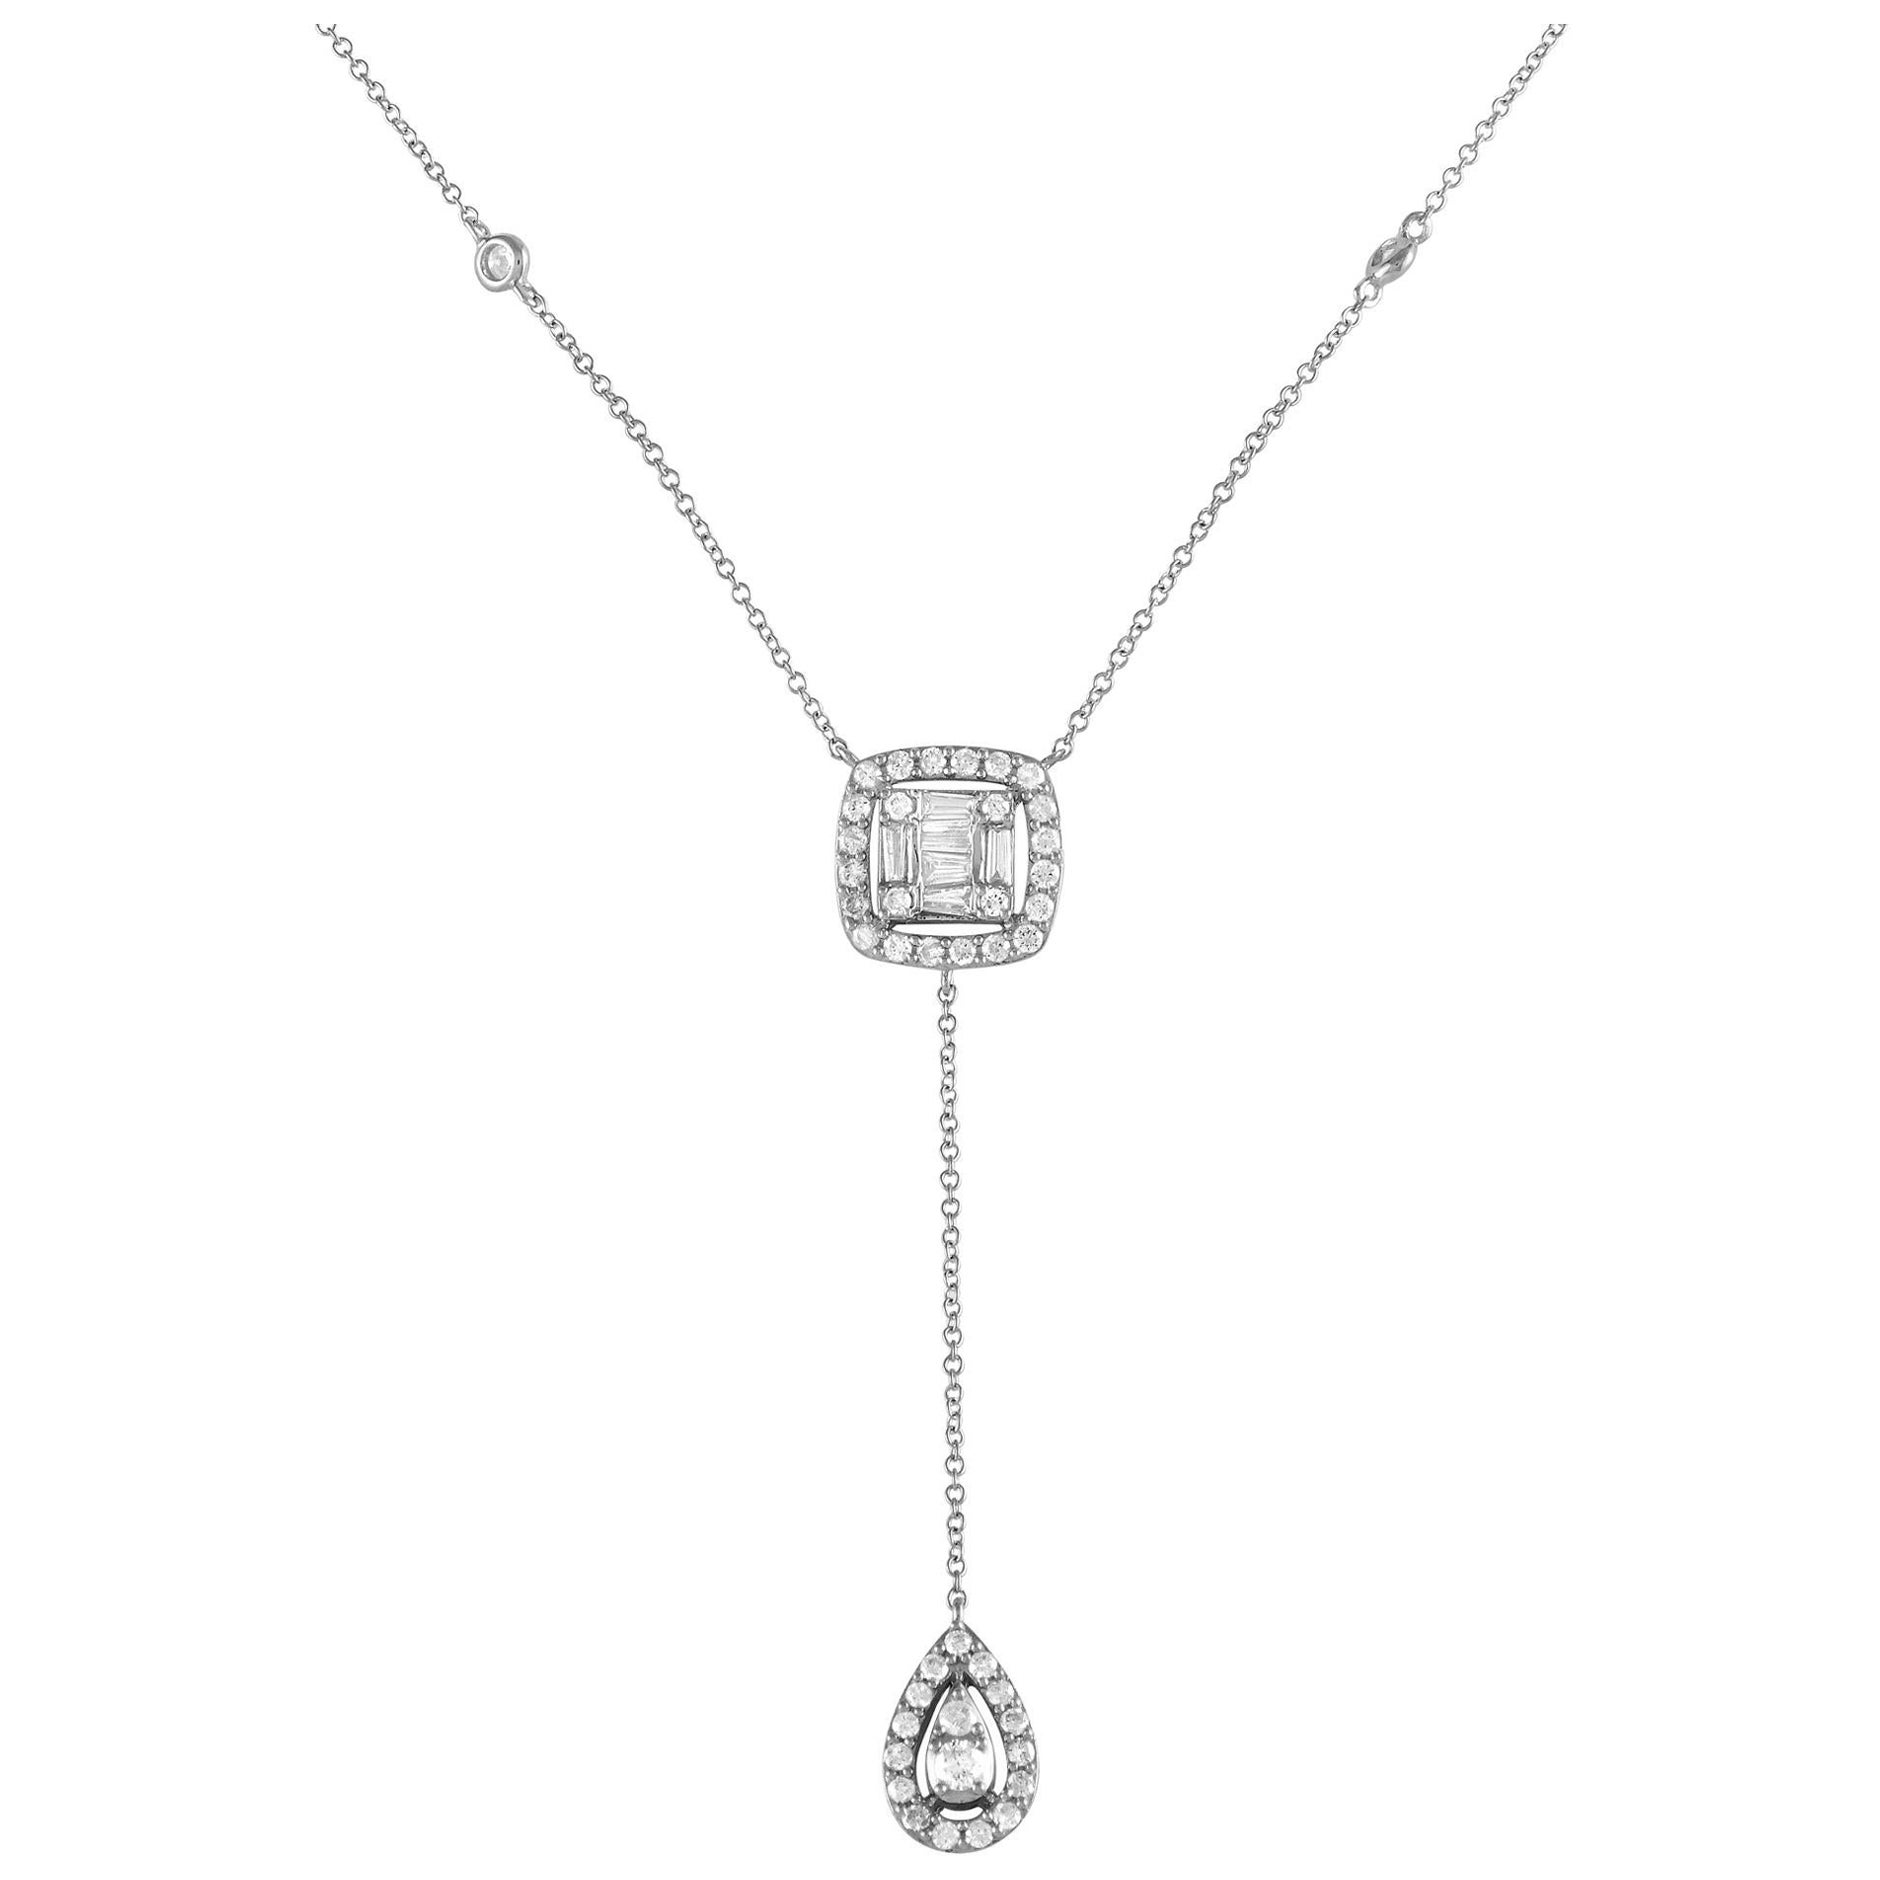 LB Exclusive 14K White Gold 0.65ct Diamond Necklace NK013181 For Sale